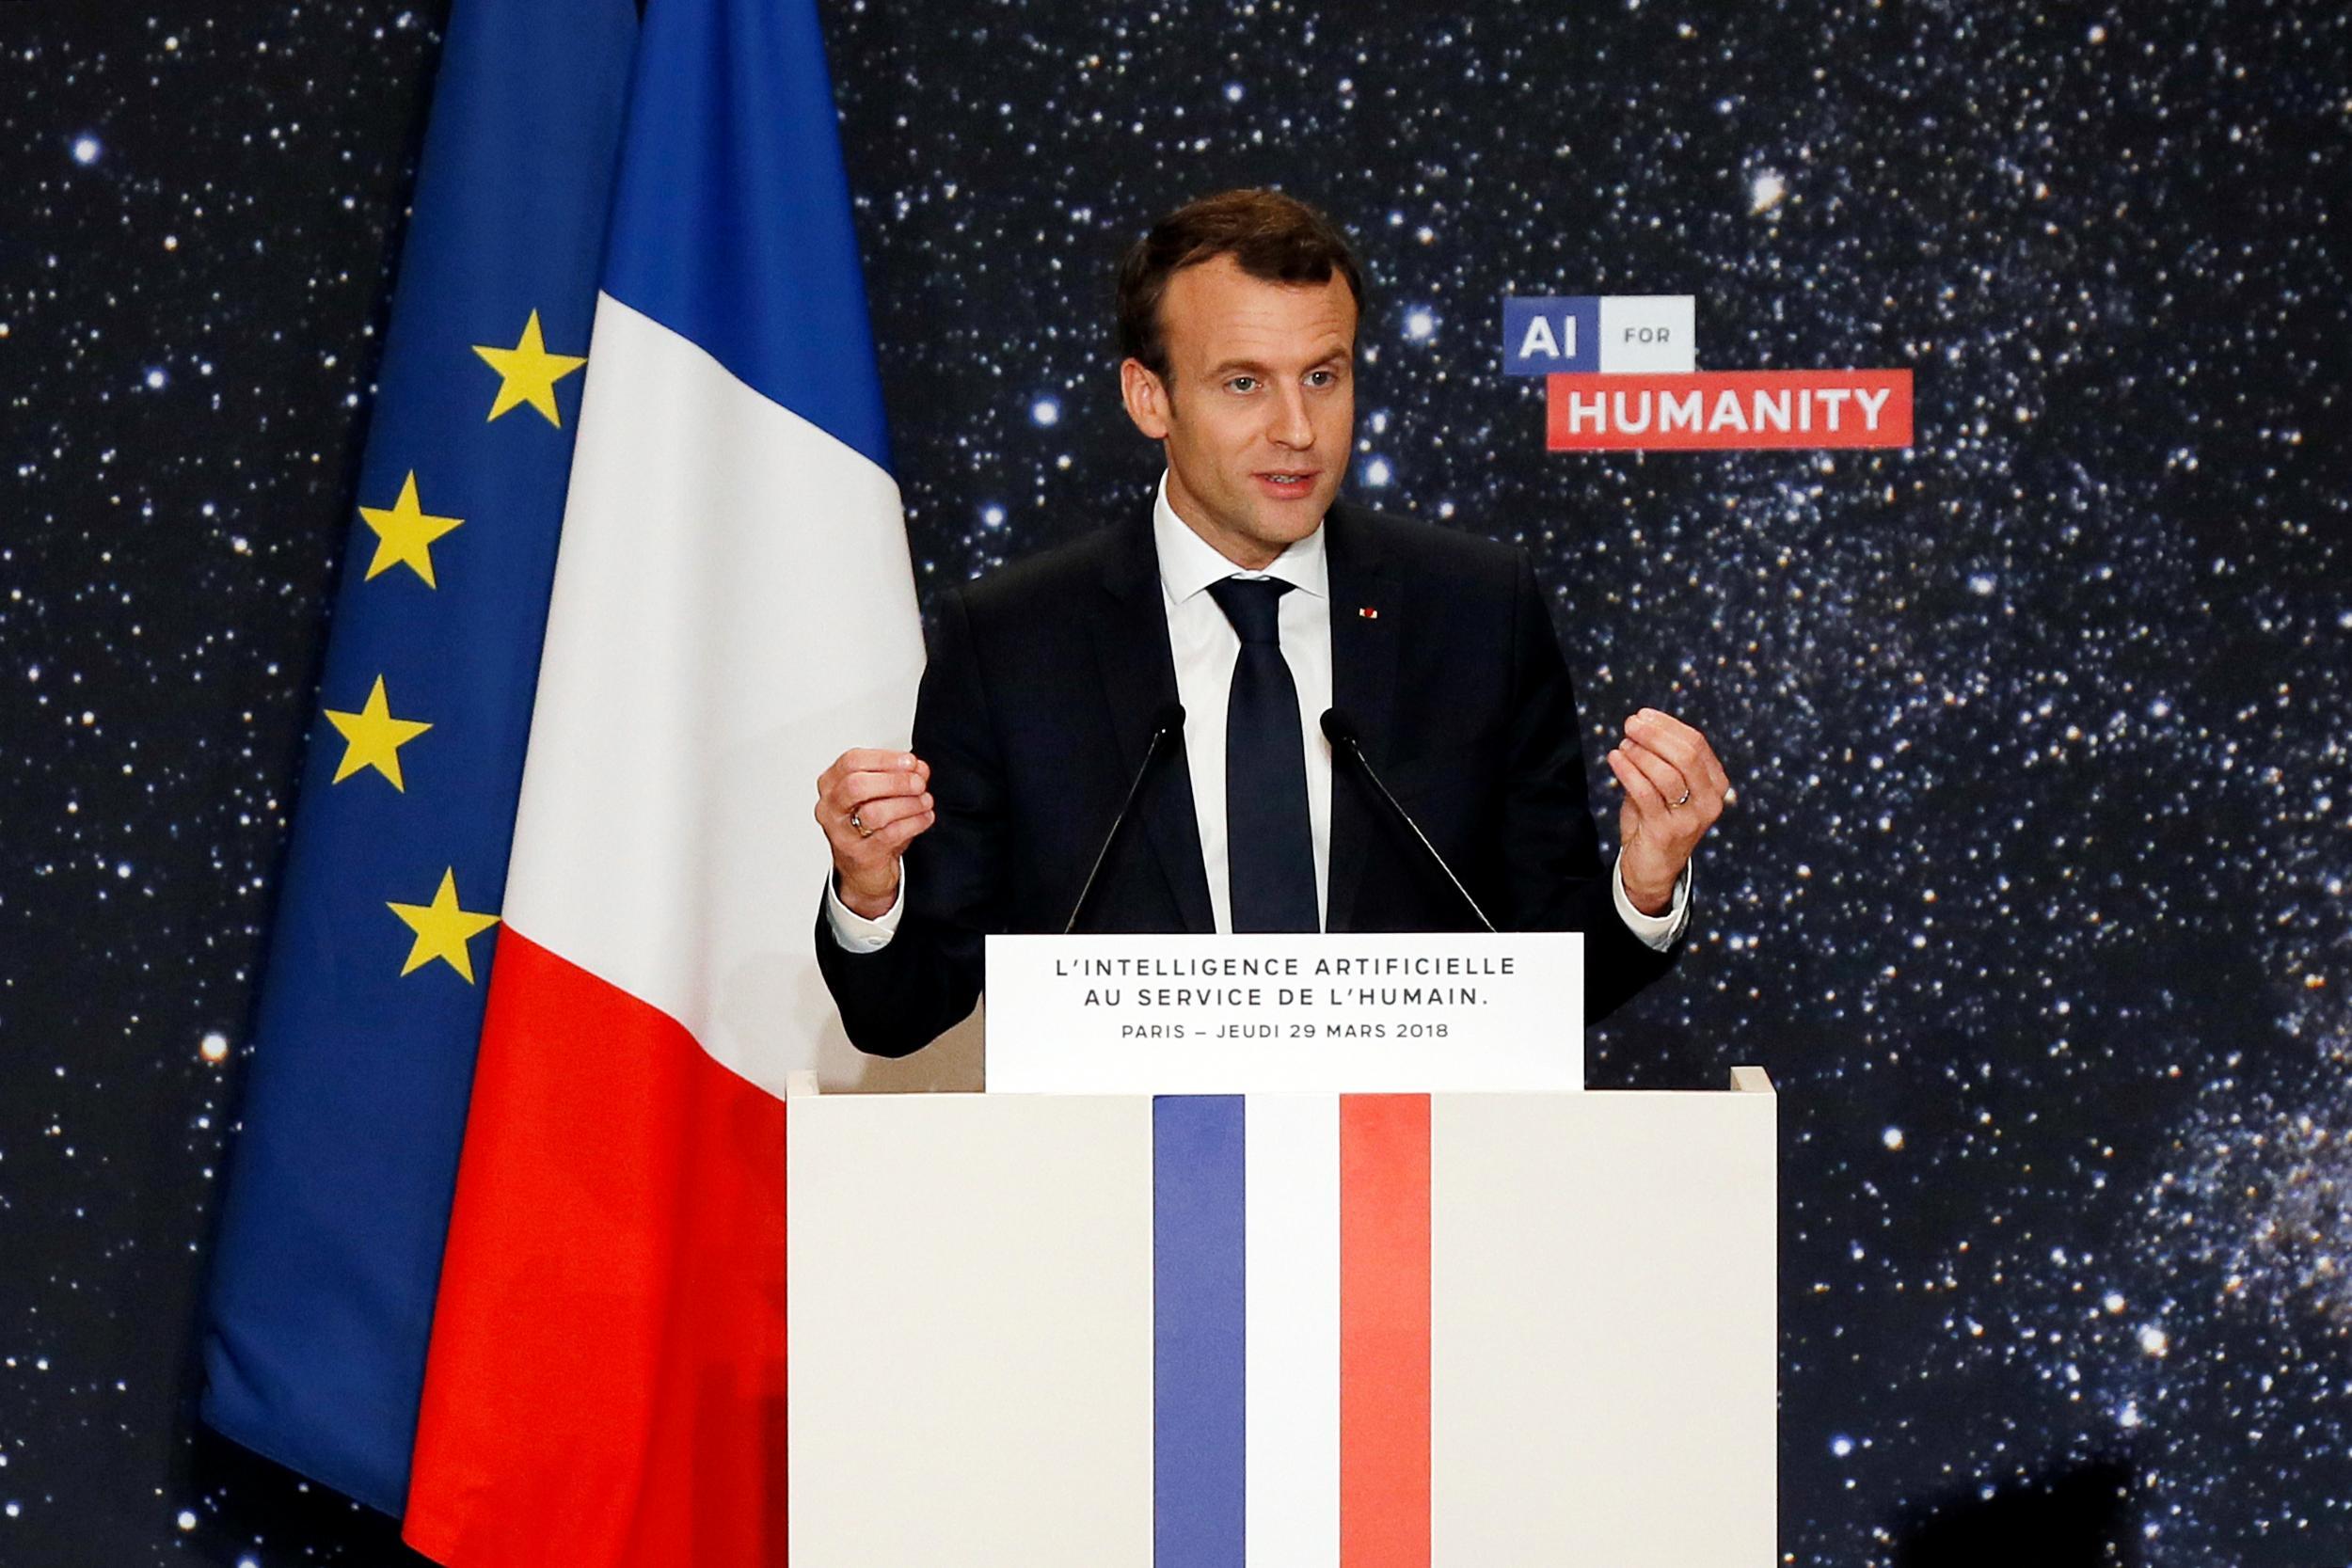 Emmanuel Macron announced the new investment at the Artificial Intelligence for Humanity event in Paris last week